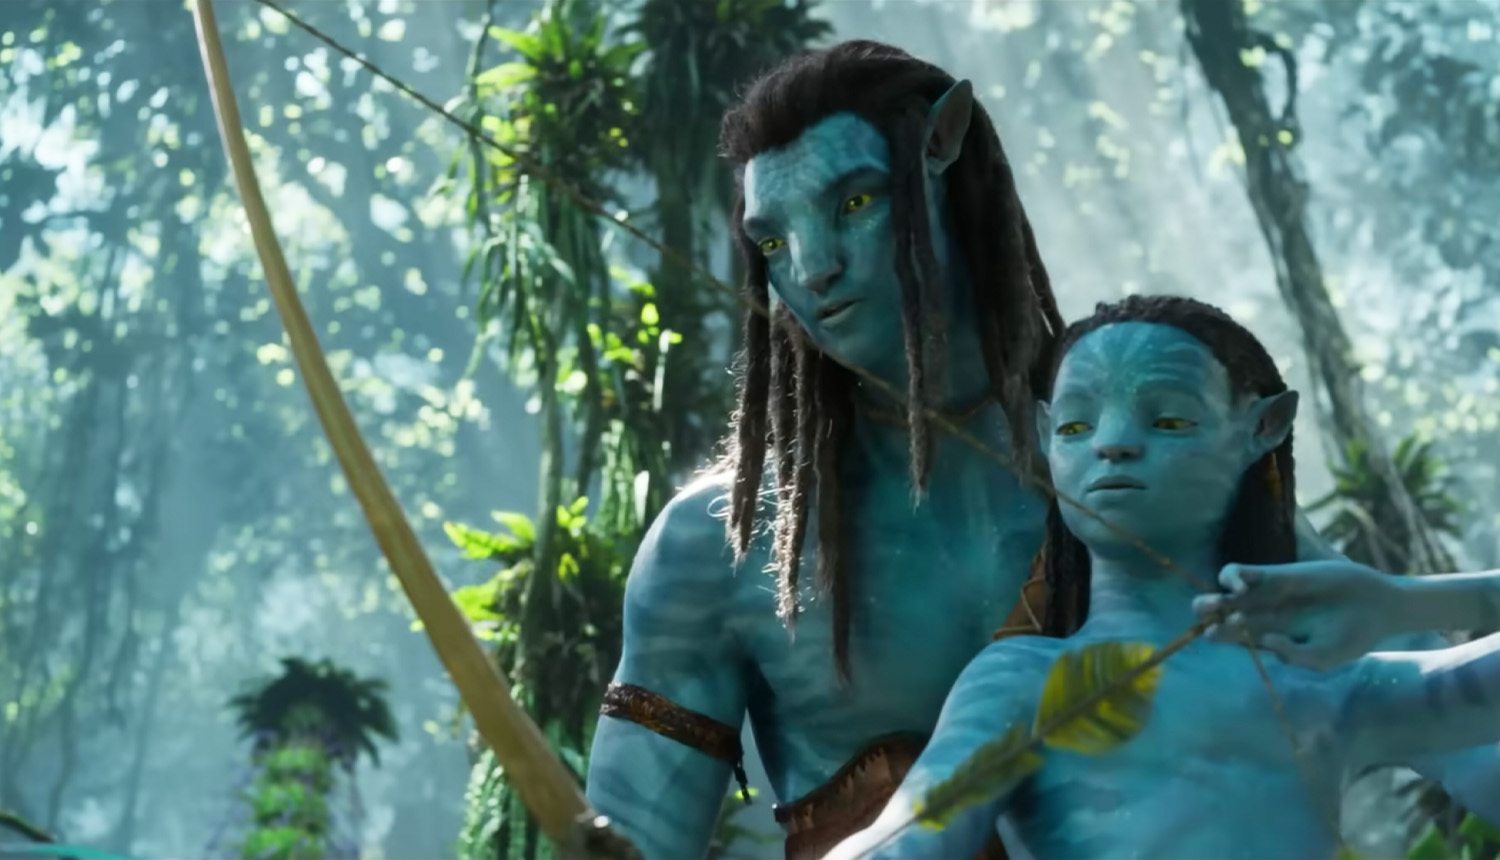 Avatar Vs. The Way Of Water Which Is The Better Movie?